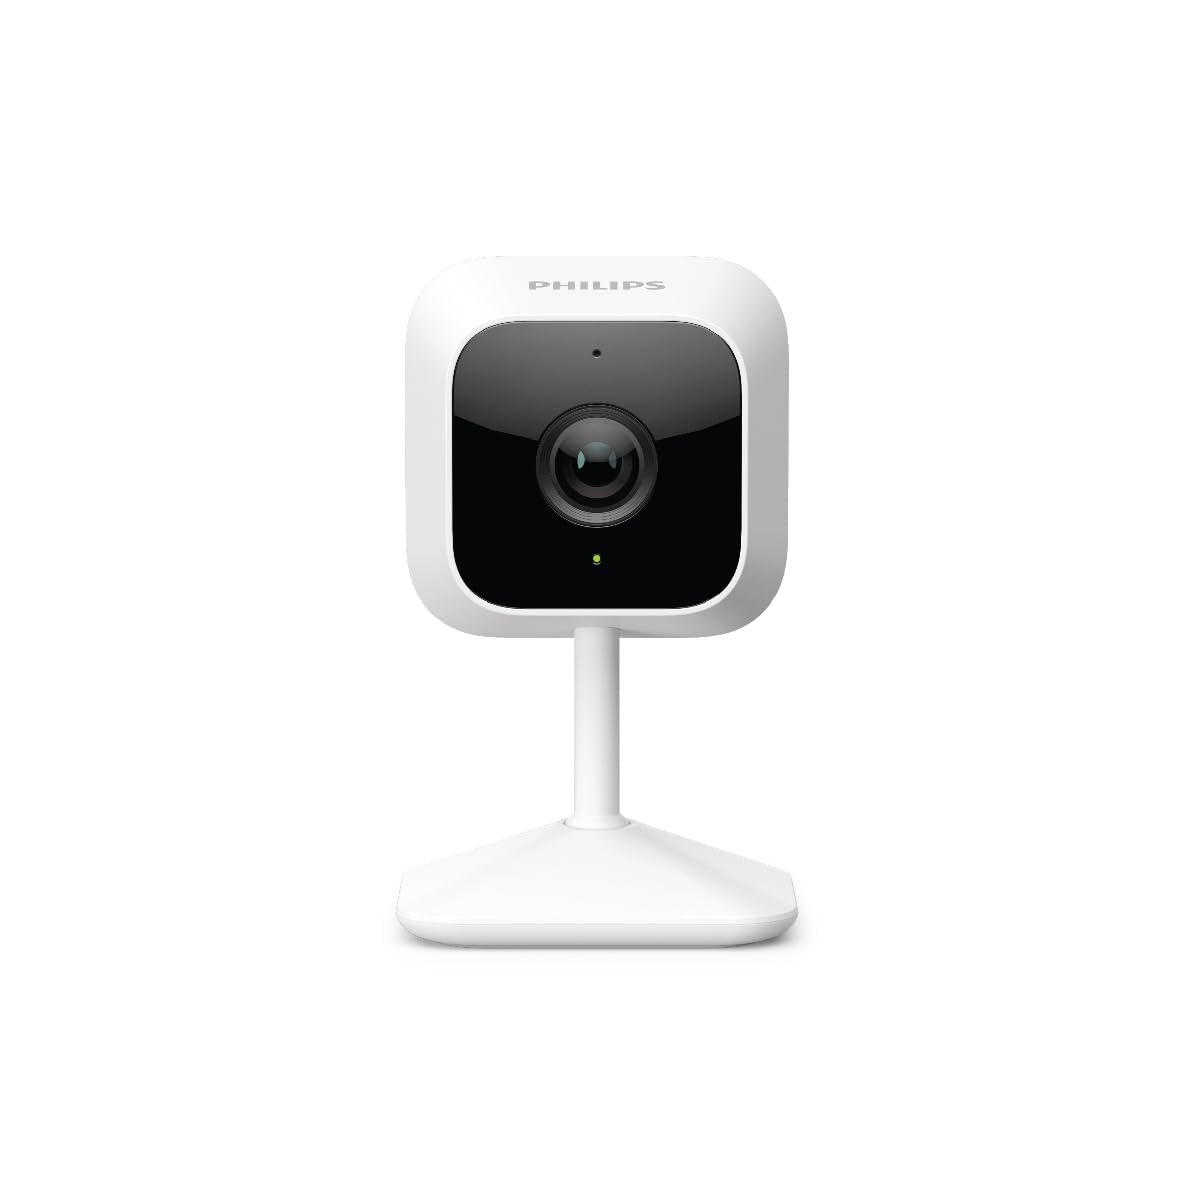 PHILIPS WiFi HSP1000 Fixed Indoor Security Camera | Full HD 2MP | 2-Way Talk | Motion Detect | Night Vision| SD Card | AES-128bit Encryption | 2 Year Brand Replacement Warranty